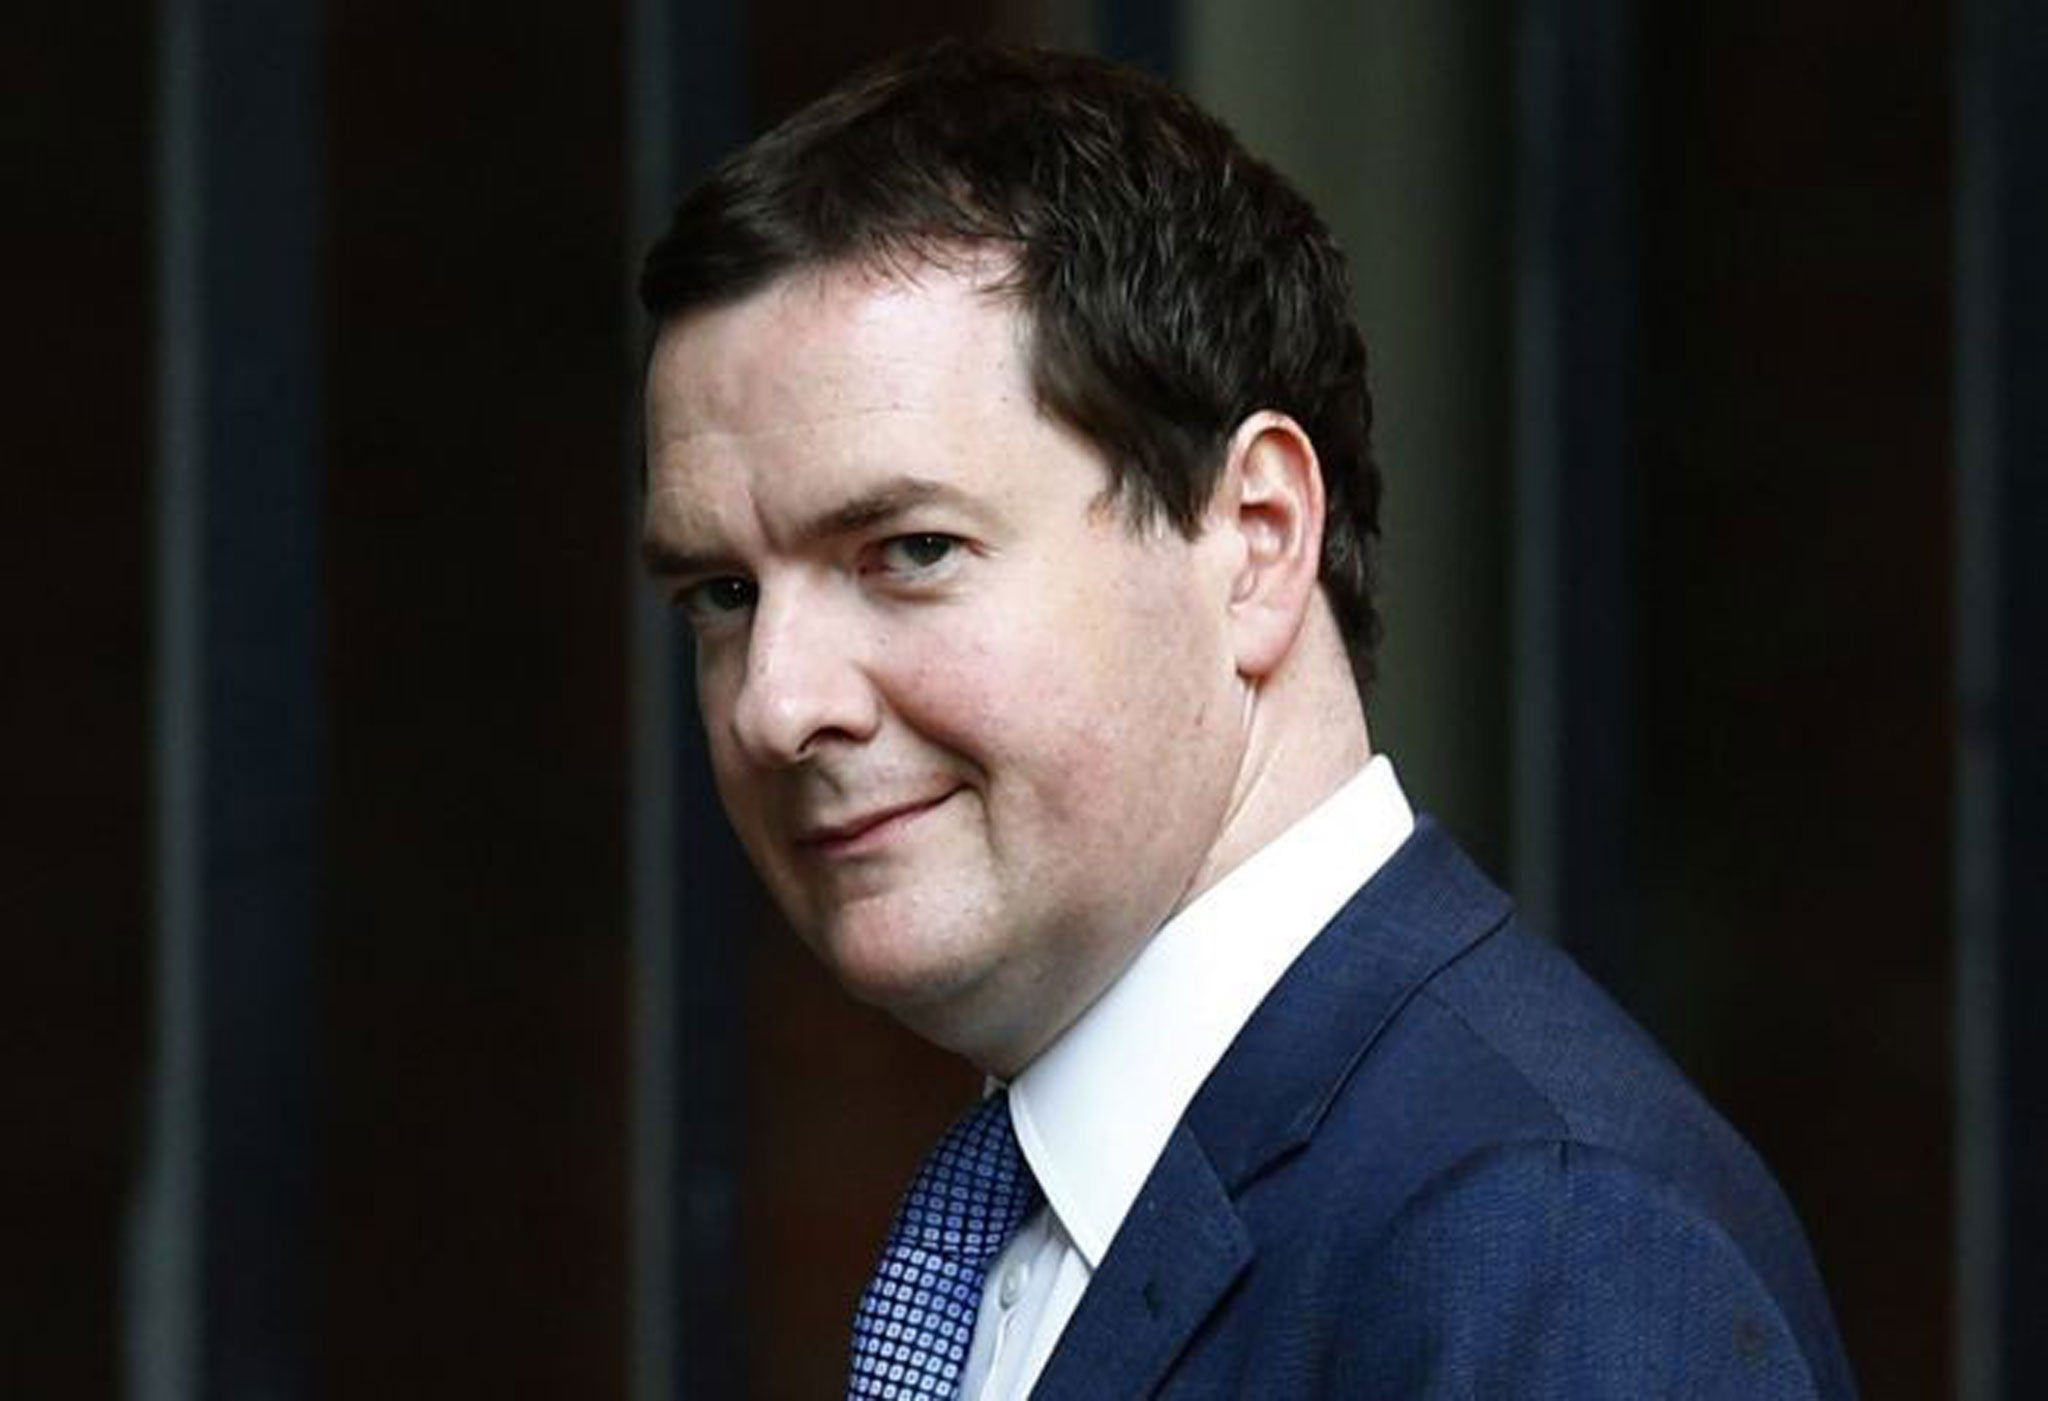 Chancellor George Osborne defended the high loan-to-value deals